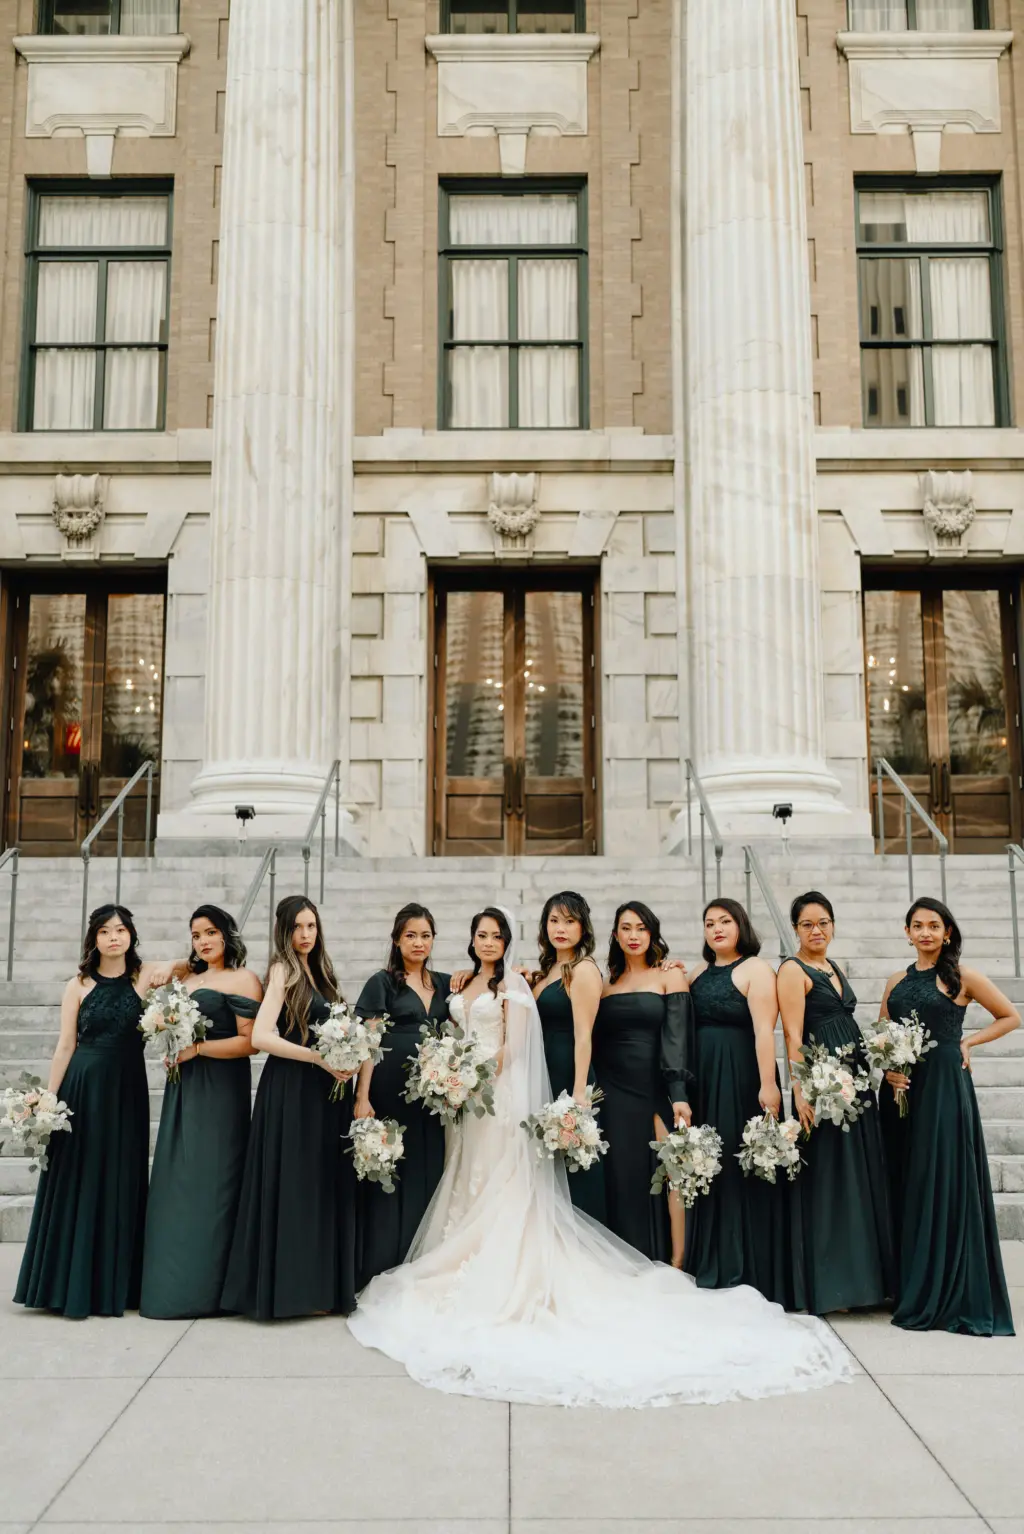 Bride and Bridesmaids Wedding Portrait | Bridesmaids in Floor Length Mix and Match Bridesmaids Dresses Holding White Floral Bouquets with Eucalyptus | Downtown Tampa Wedding Venue Le Meridien | Tampa Hair and Makeup Femme Akoi | Videographer Shannon Kelly Films | Photographer J&S Media